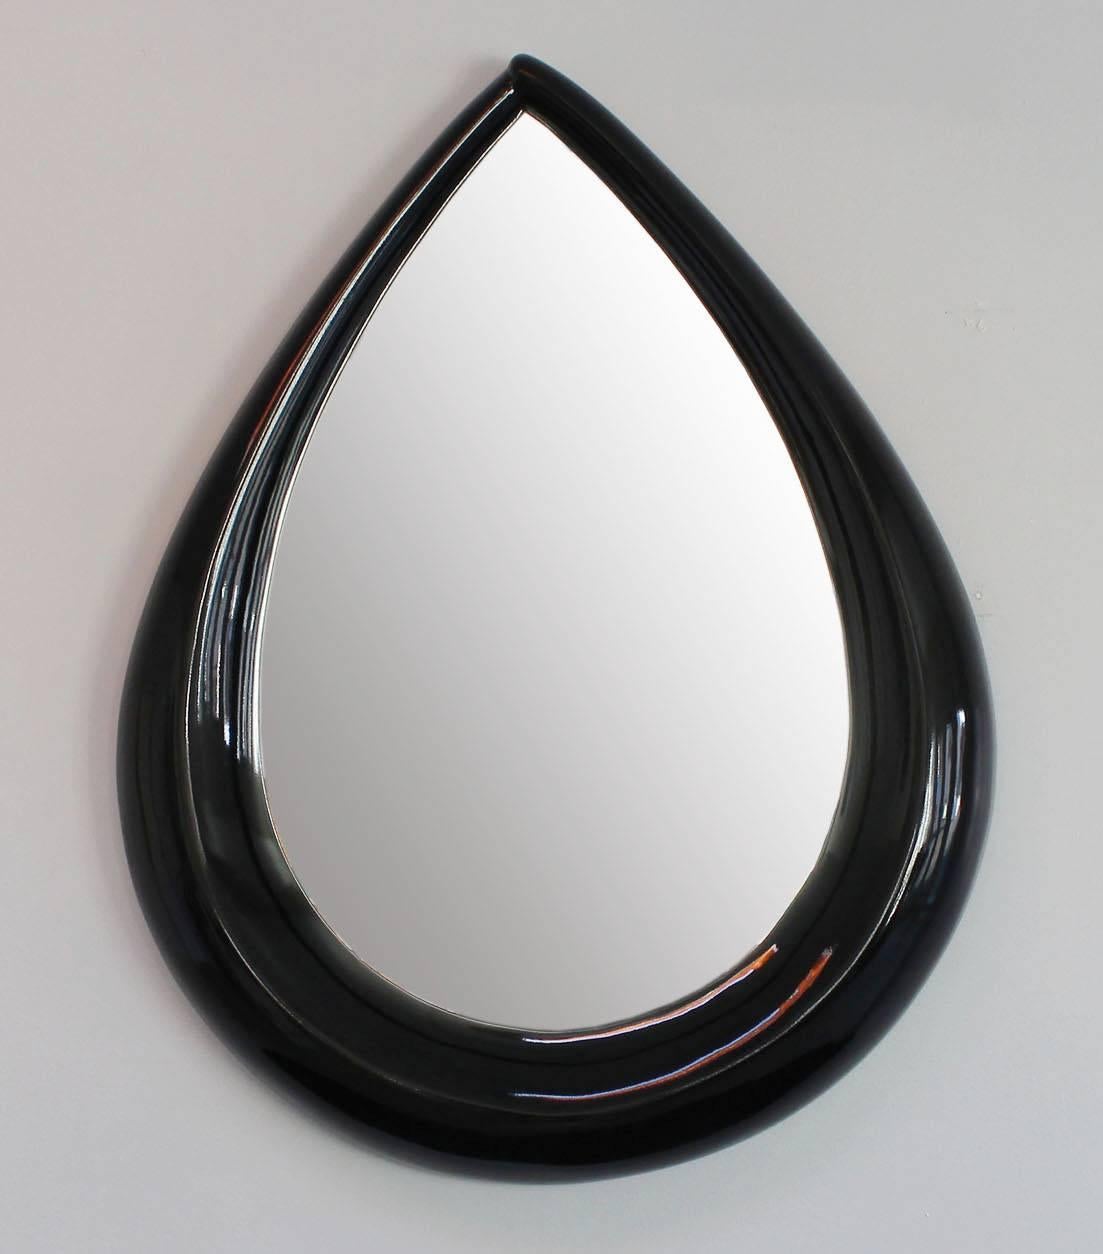 A sculptural black lacquered teardrop mirror in the manner of Wendell Castle.
Matching shelf also available.

complimentary delivery within 30 miles.

